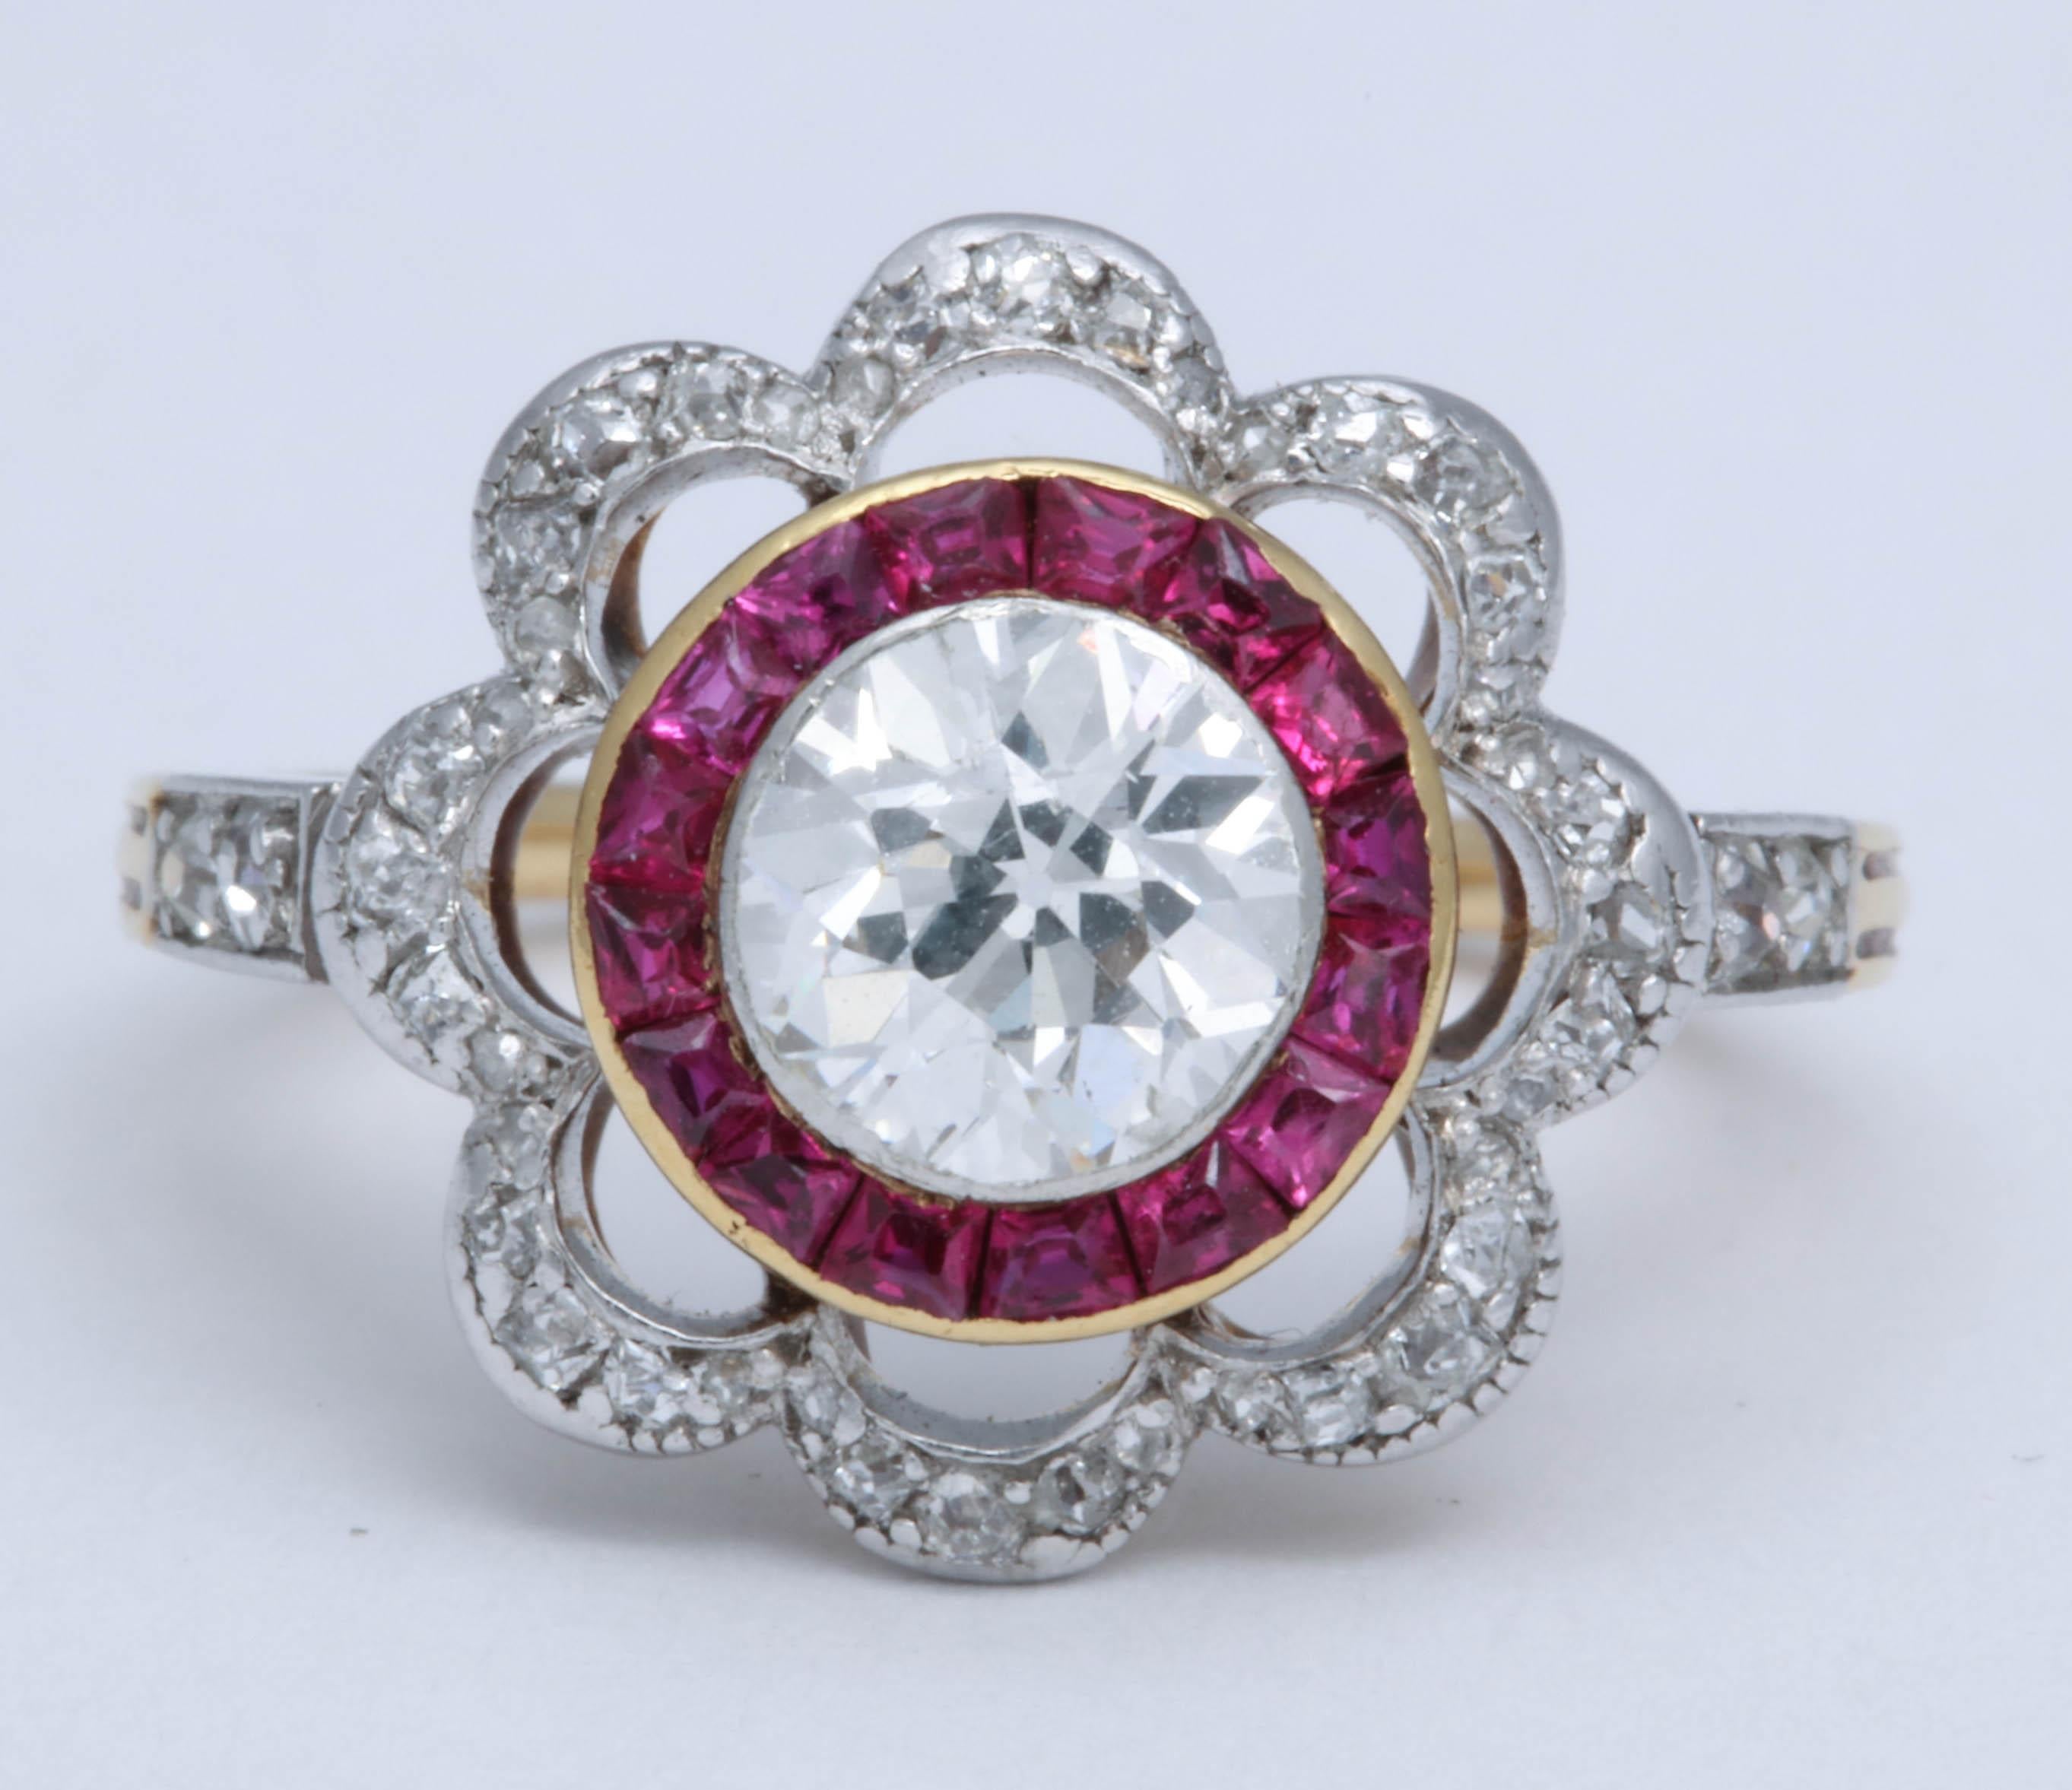 Platinum on 18K yellow gold. A center Old European cut diamond, weighing approximately .95cts is surrounded by 16 rubies. 44 Rose, single cut, and old mine cut diamonds are set around in a scalloped design and on the shoulders of the mount.